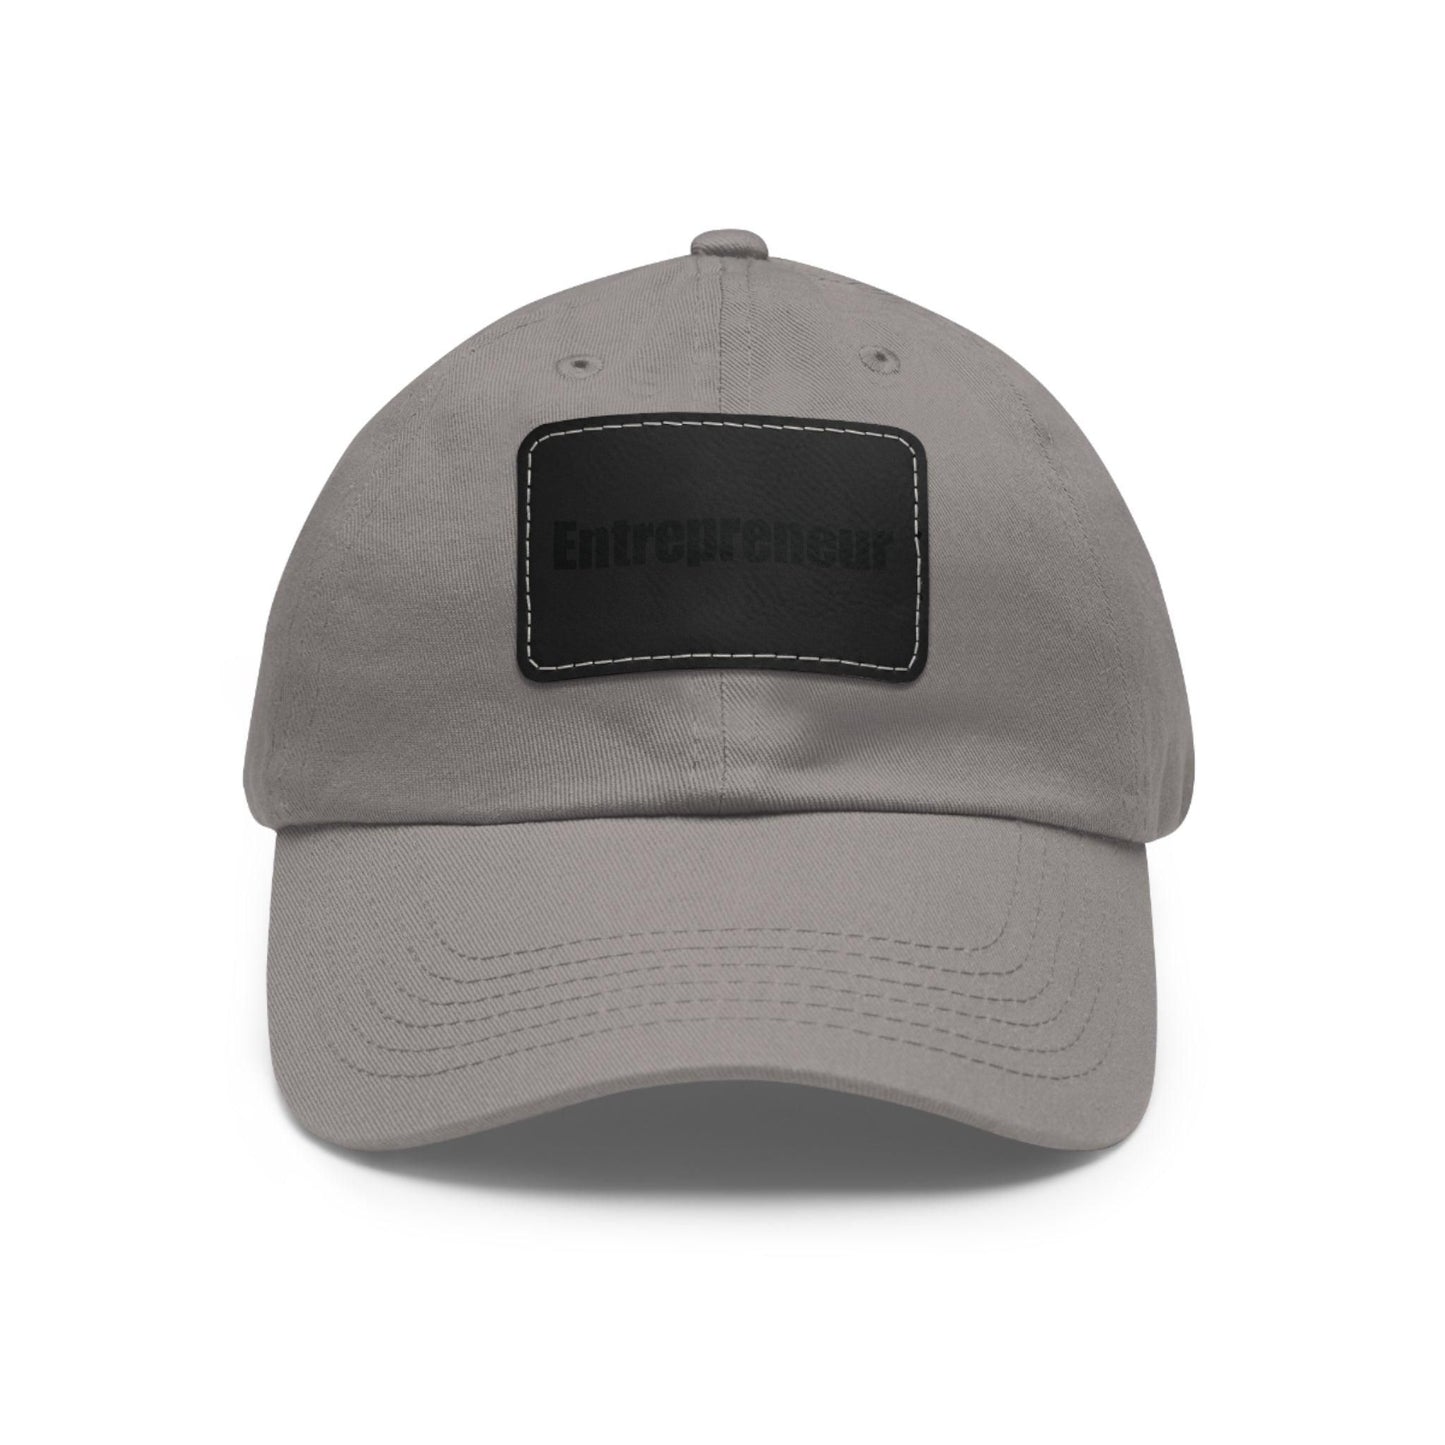 Entrepreneur Baseball Hat with Leather Patch Cap Grey / Black patch Rectangle One size